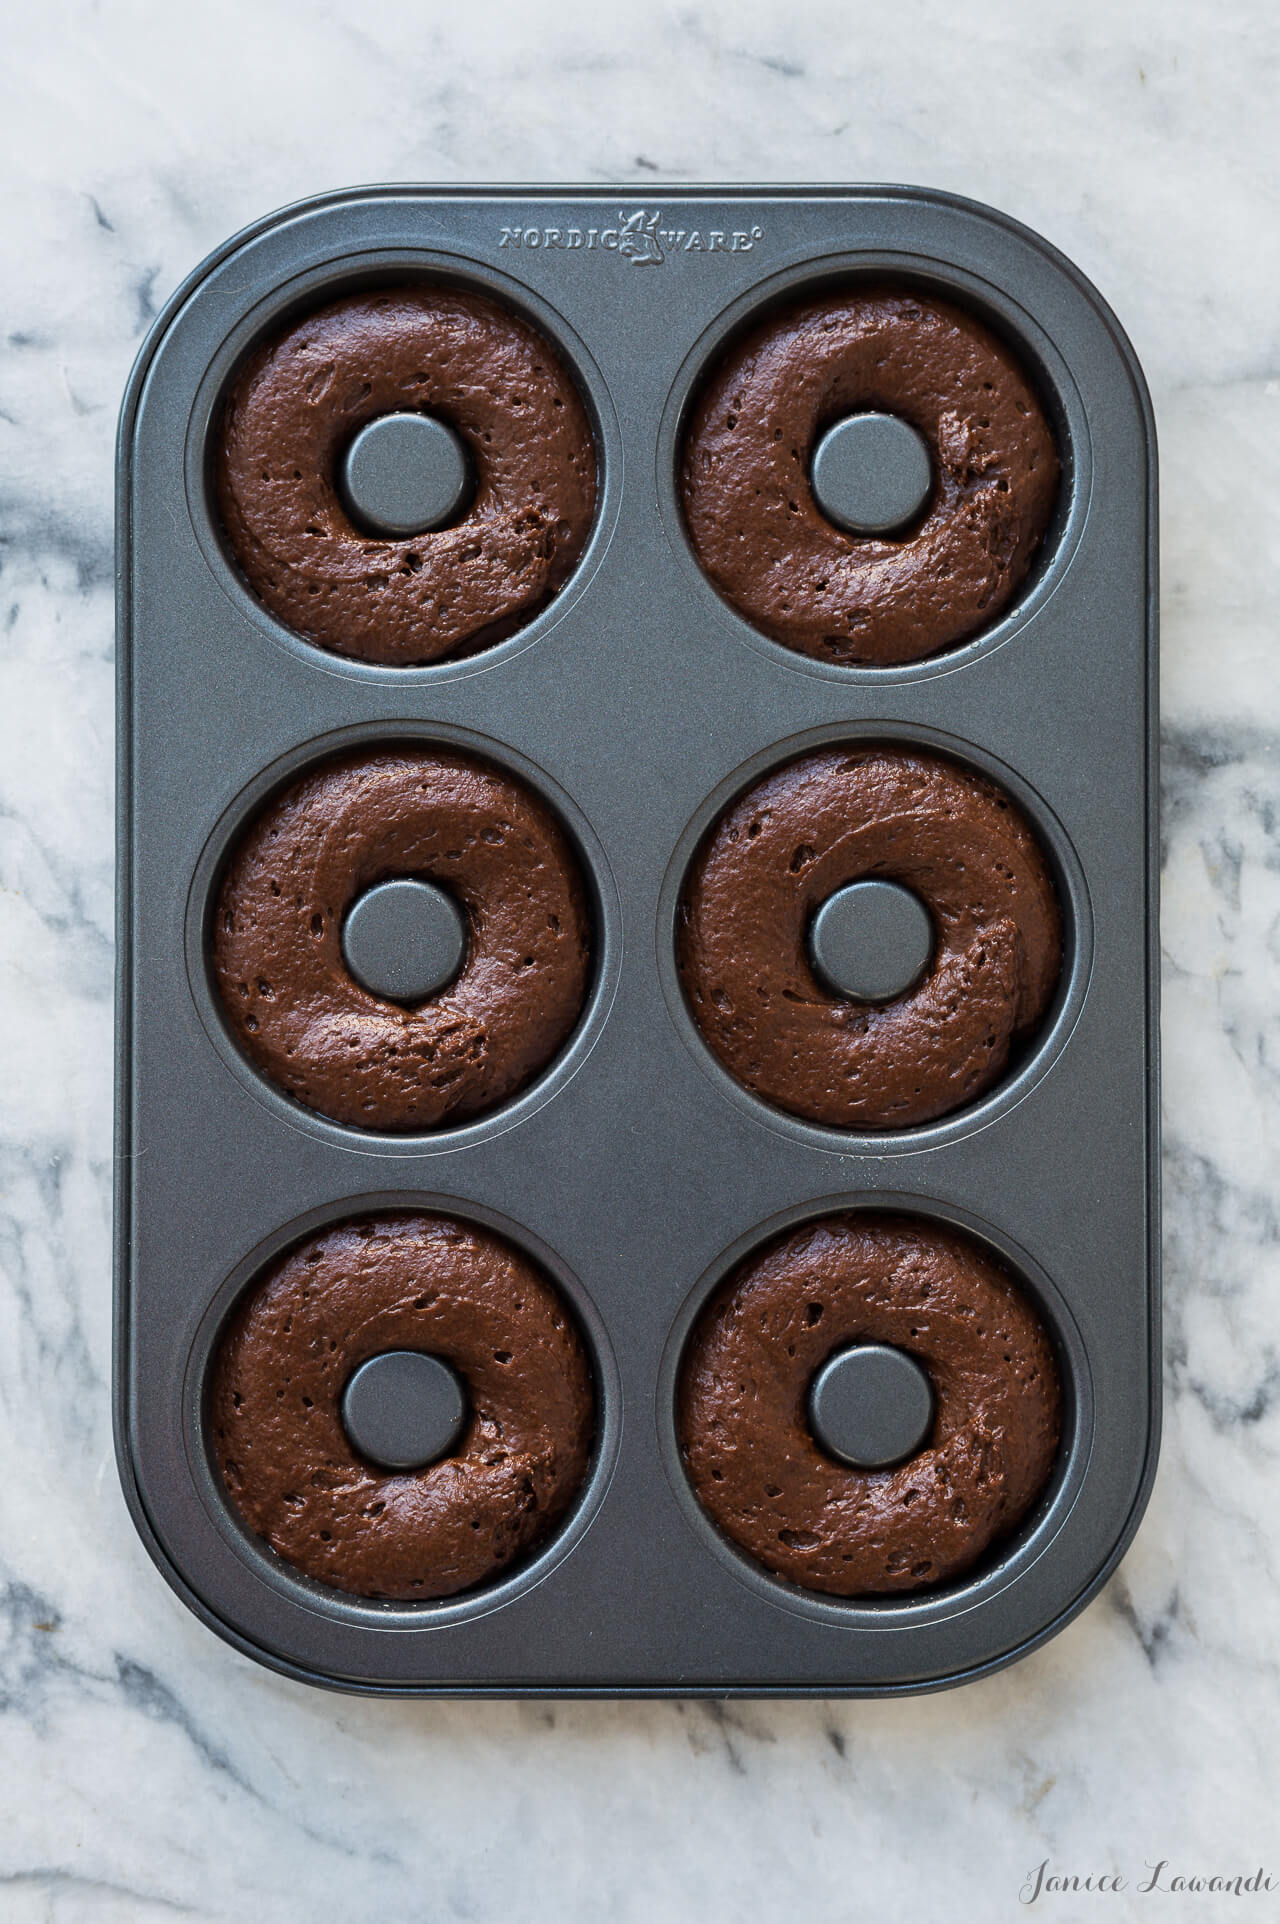 Baked Chocolate Donuts, not fried